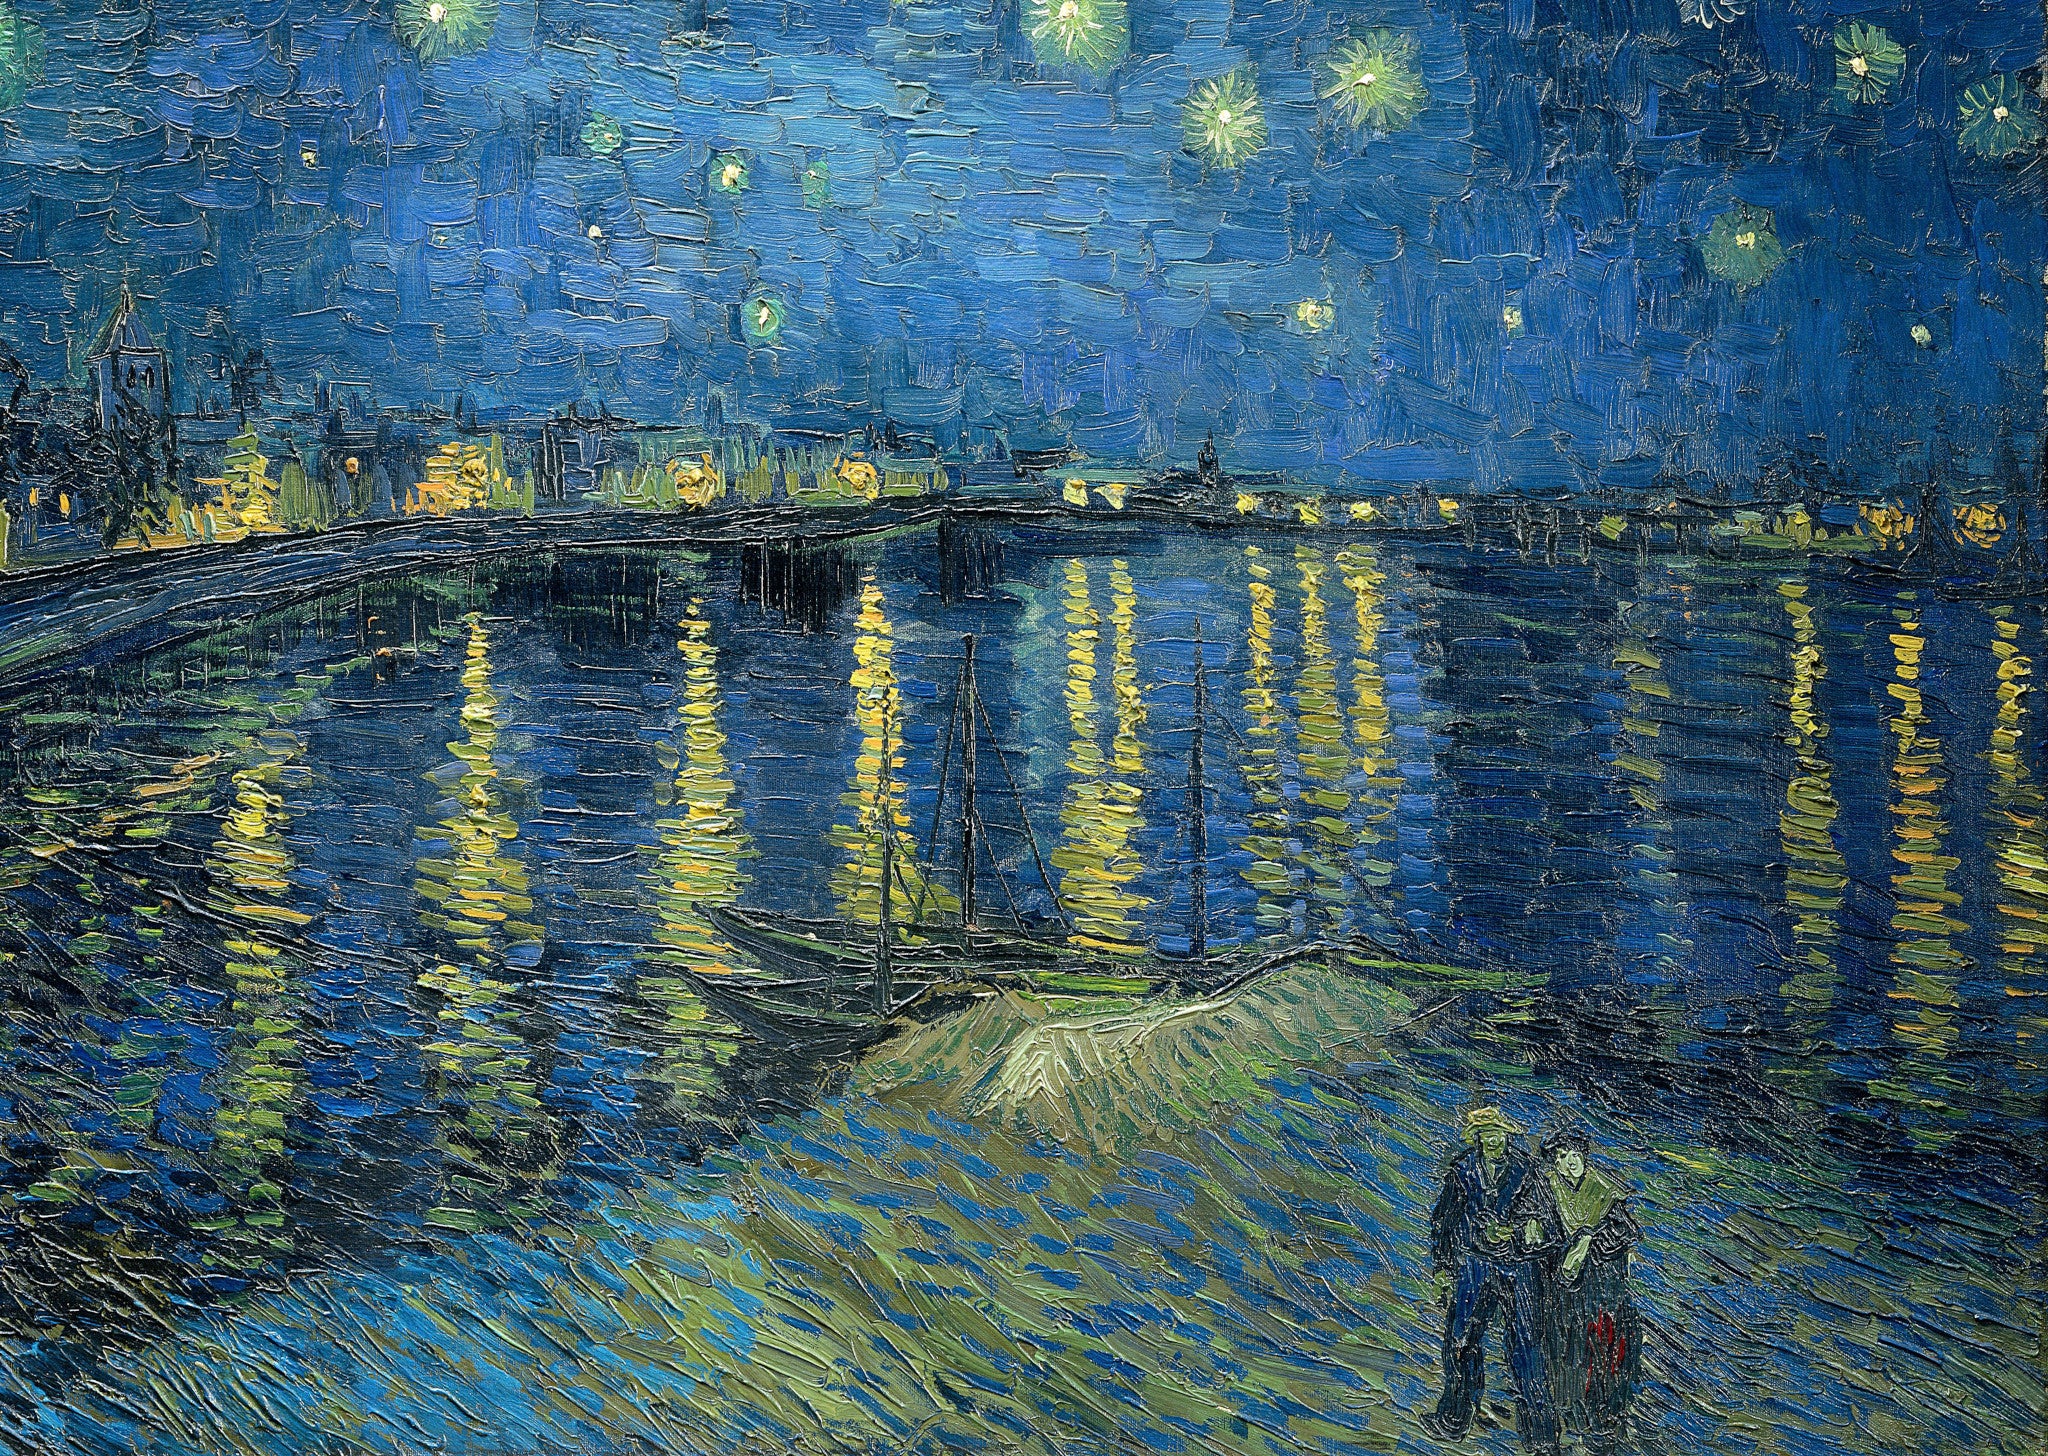 Vincent Van Gogh - Starry Night Over the Rhone - A4 Mini Print/Poster